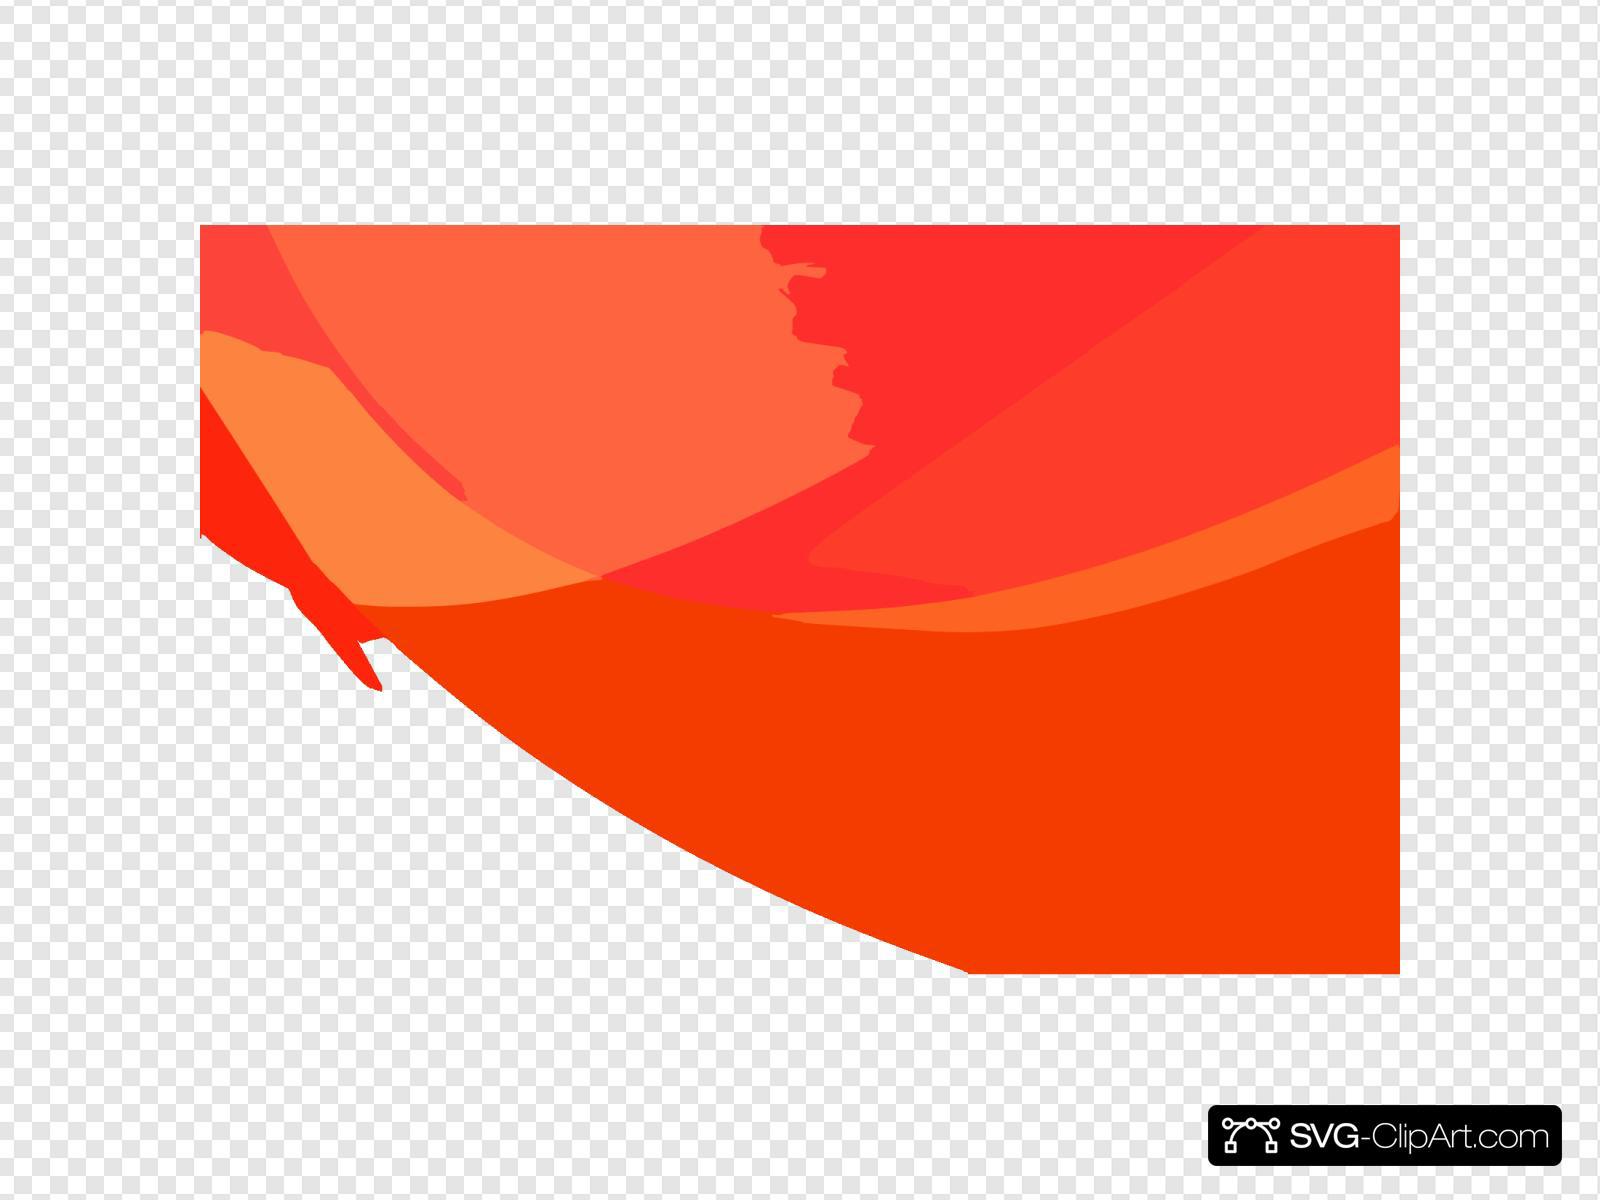 Red An Orange Gradient Abstract Wallpaper Svg Clipart - Graphic Design , HD Wallpaper & Backgrounds